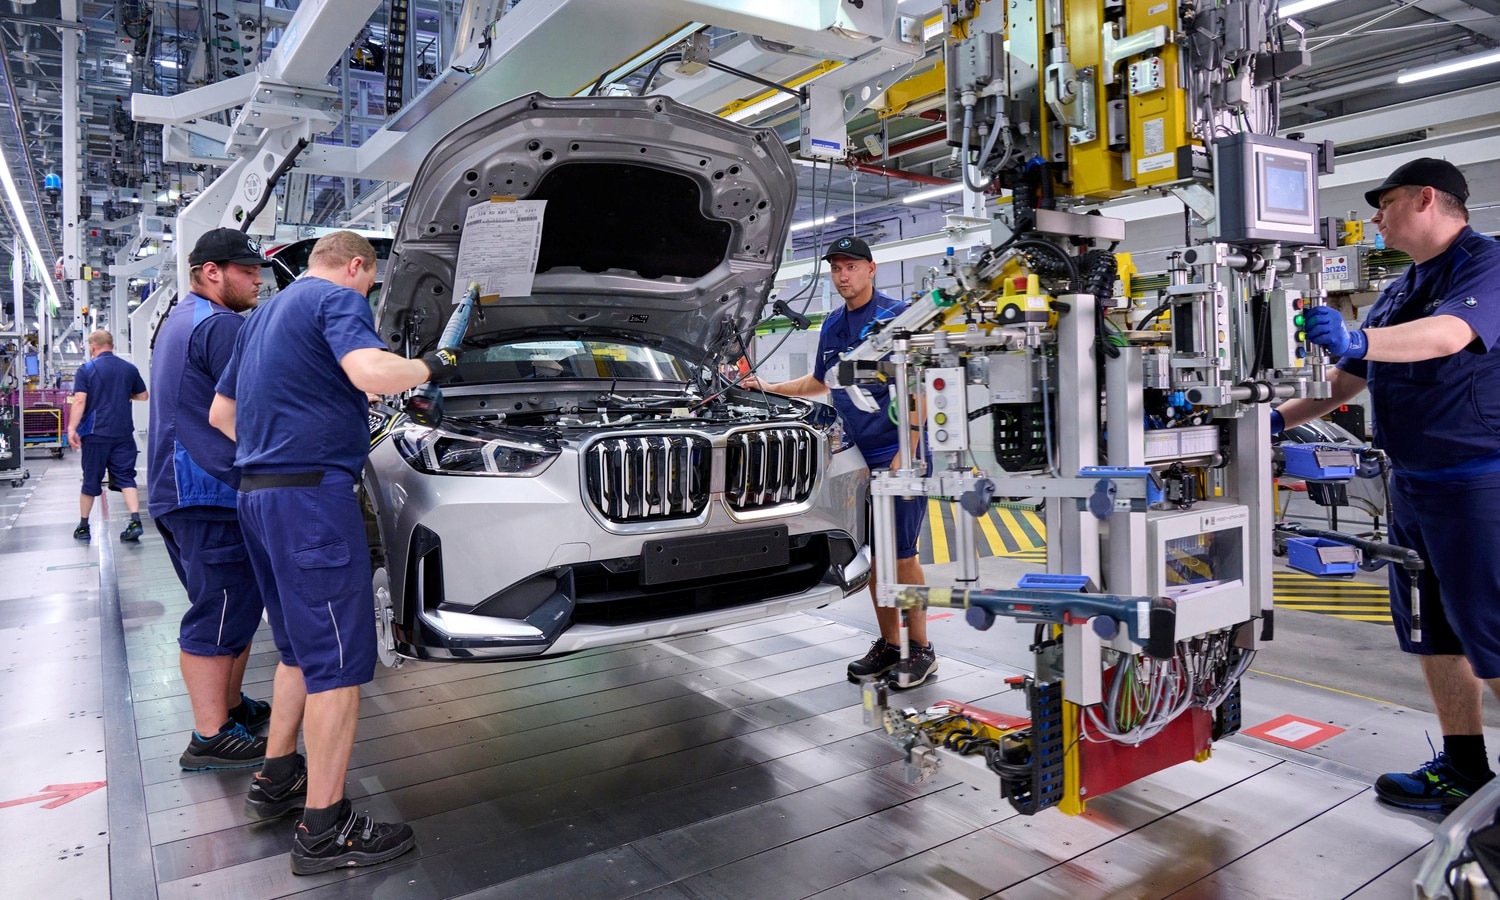 Today’s start of production for the fully-electric BMW iX1 in Regensburg